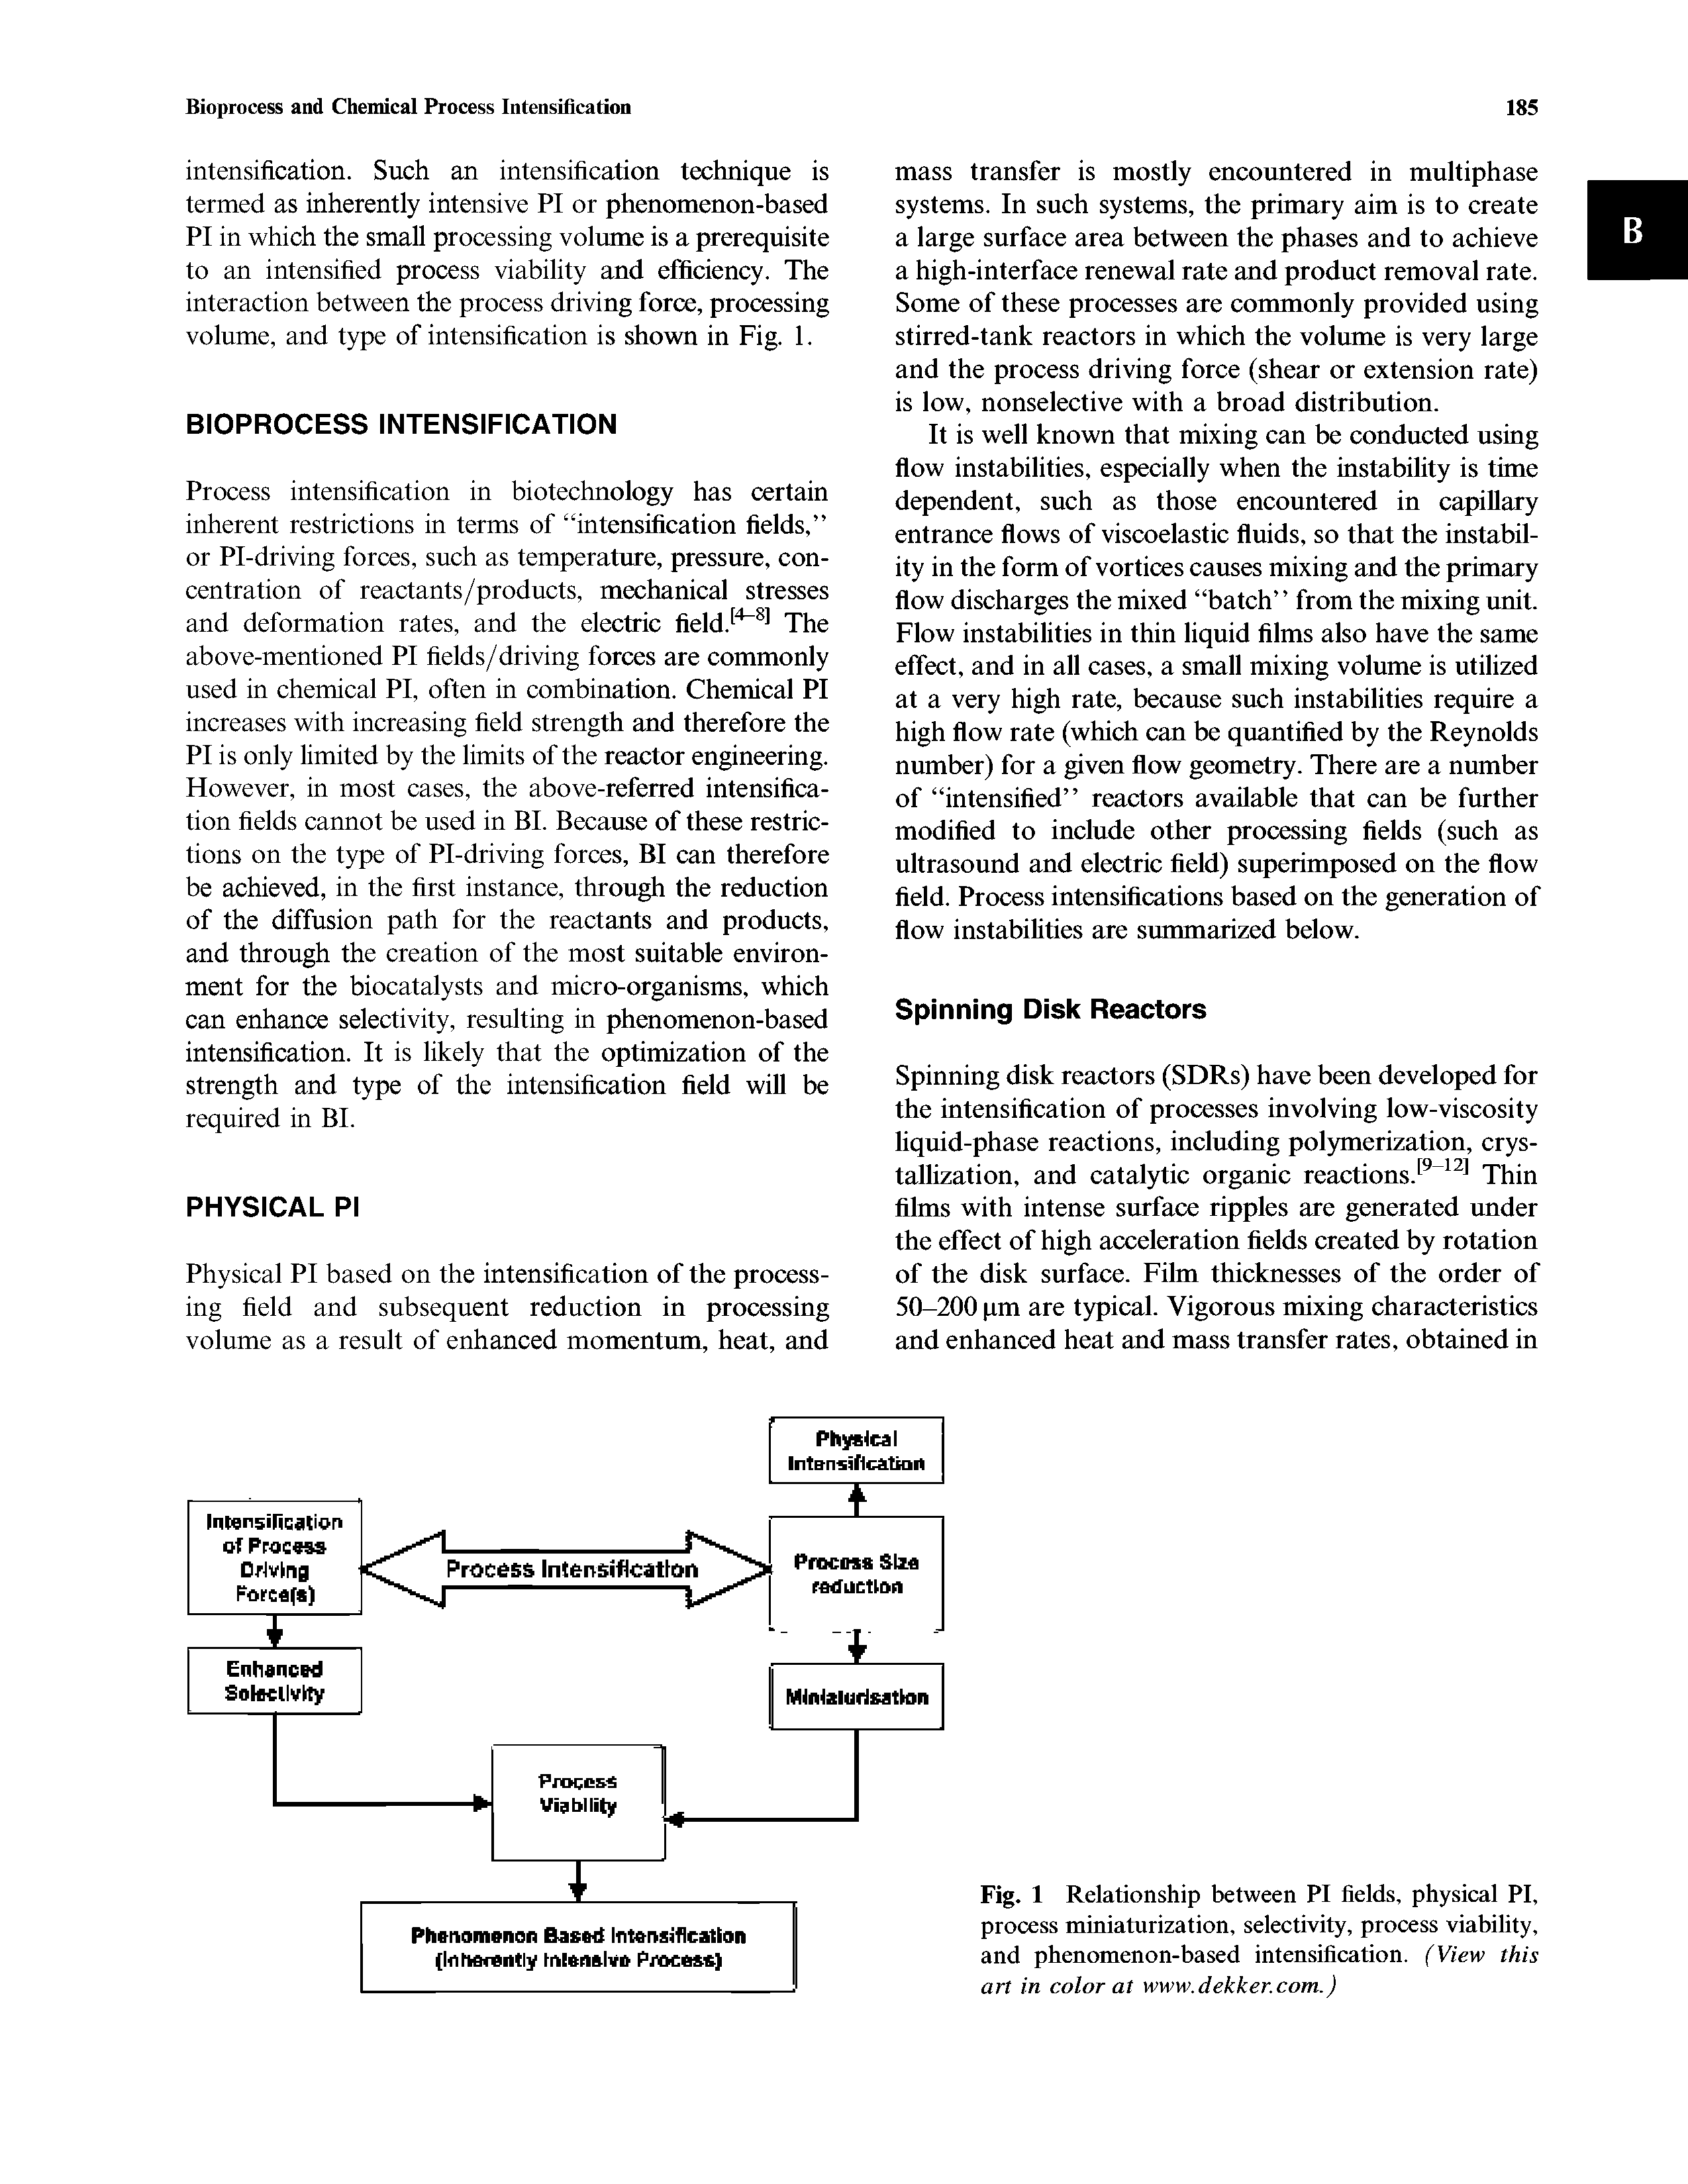 Fig. 1 Relationship between PI fields, physical PI, process miniaturization, selectivity, process viability, and phenomenon-based intensification. (View this art in color at www.dekker.com.)...